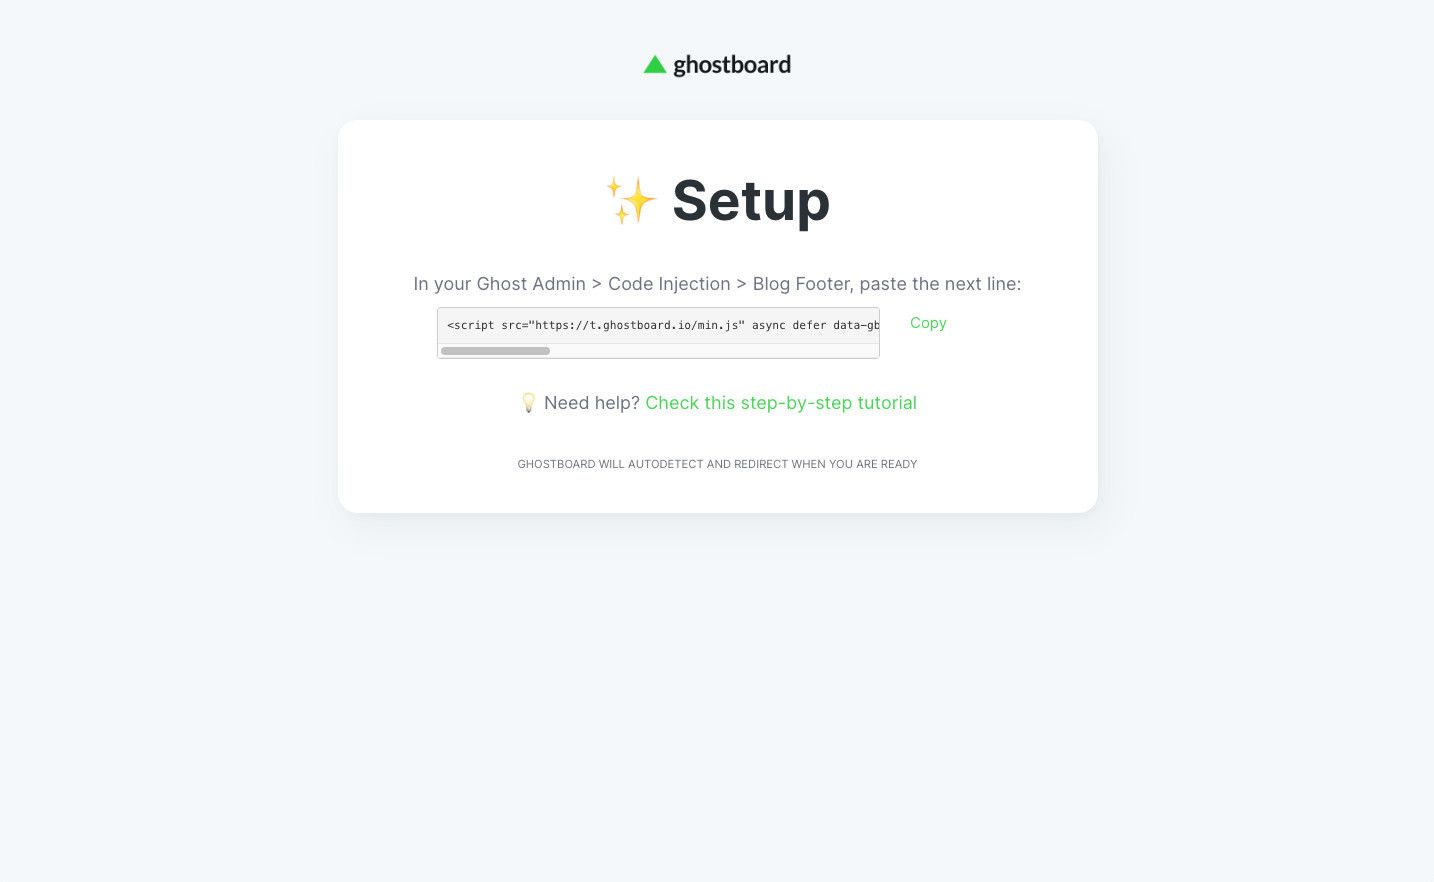 How to setup Ghostboard